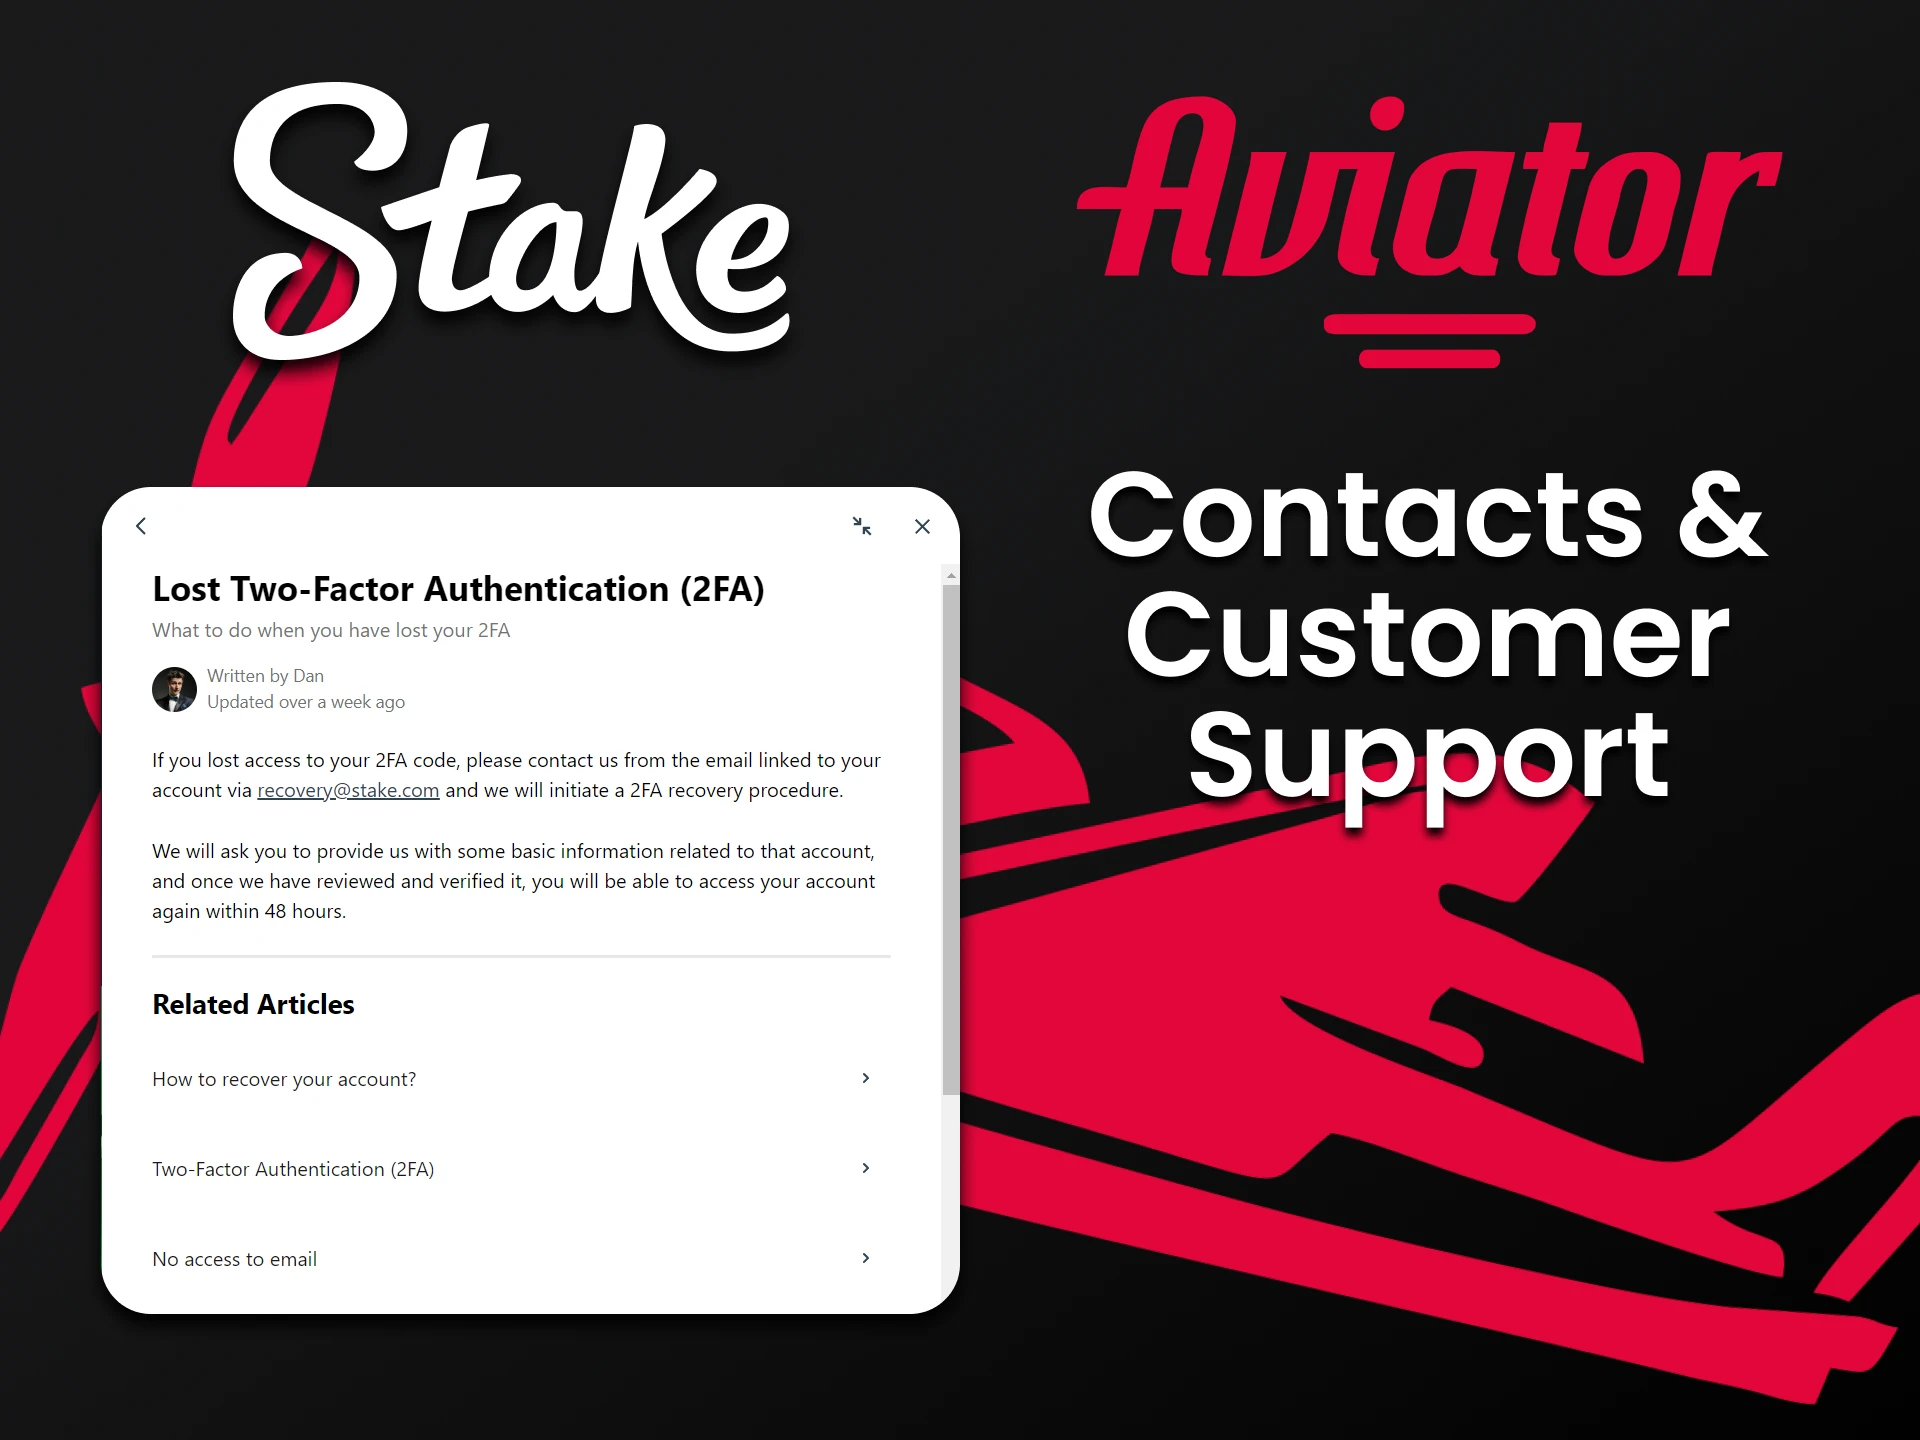 The Stake website has a live chat to support playing Aviator.